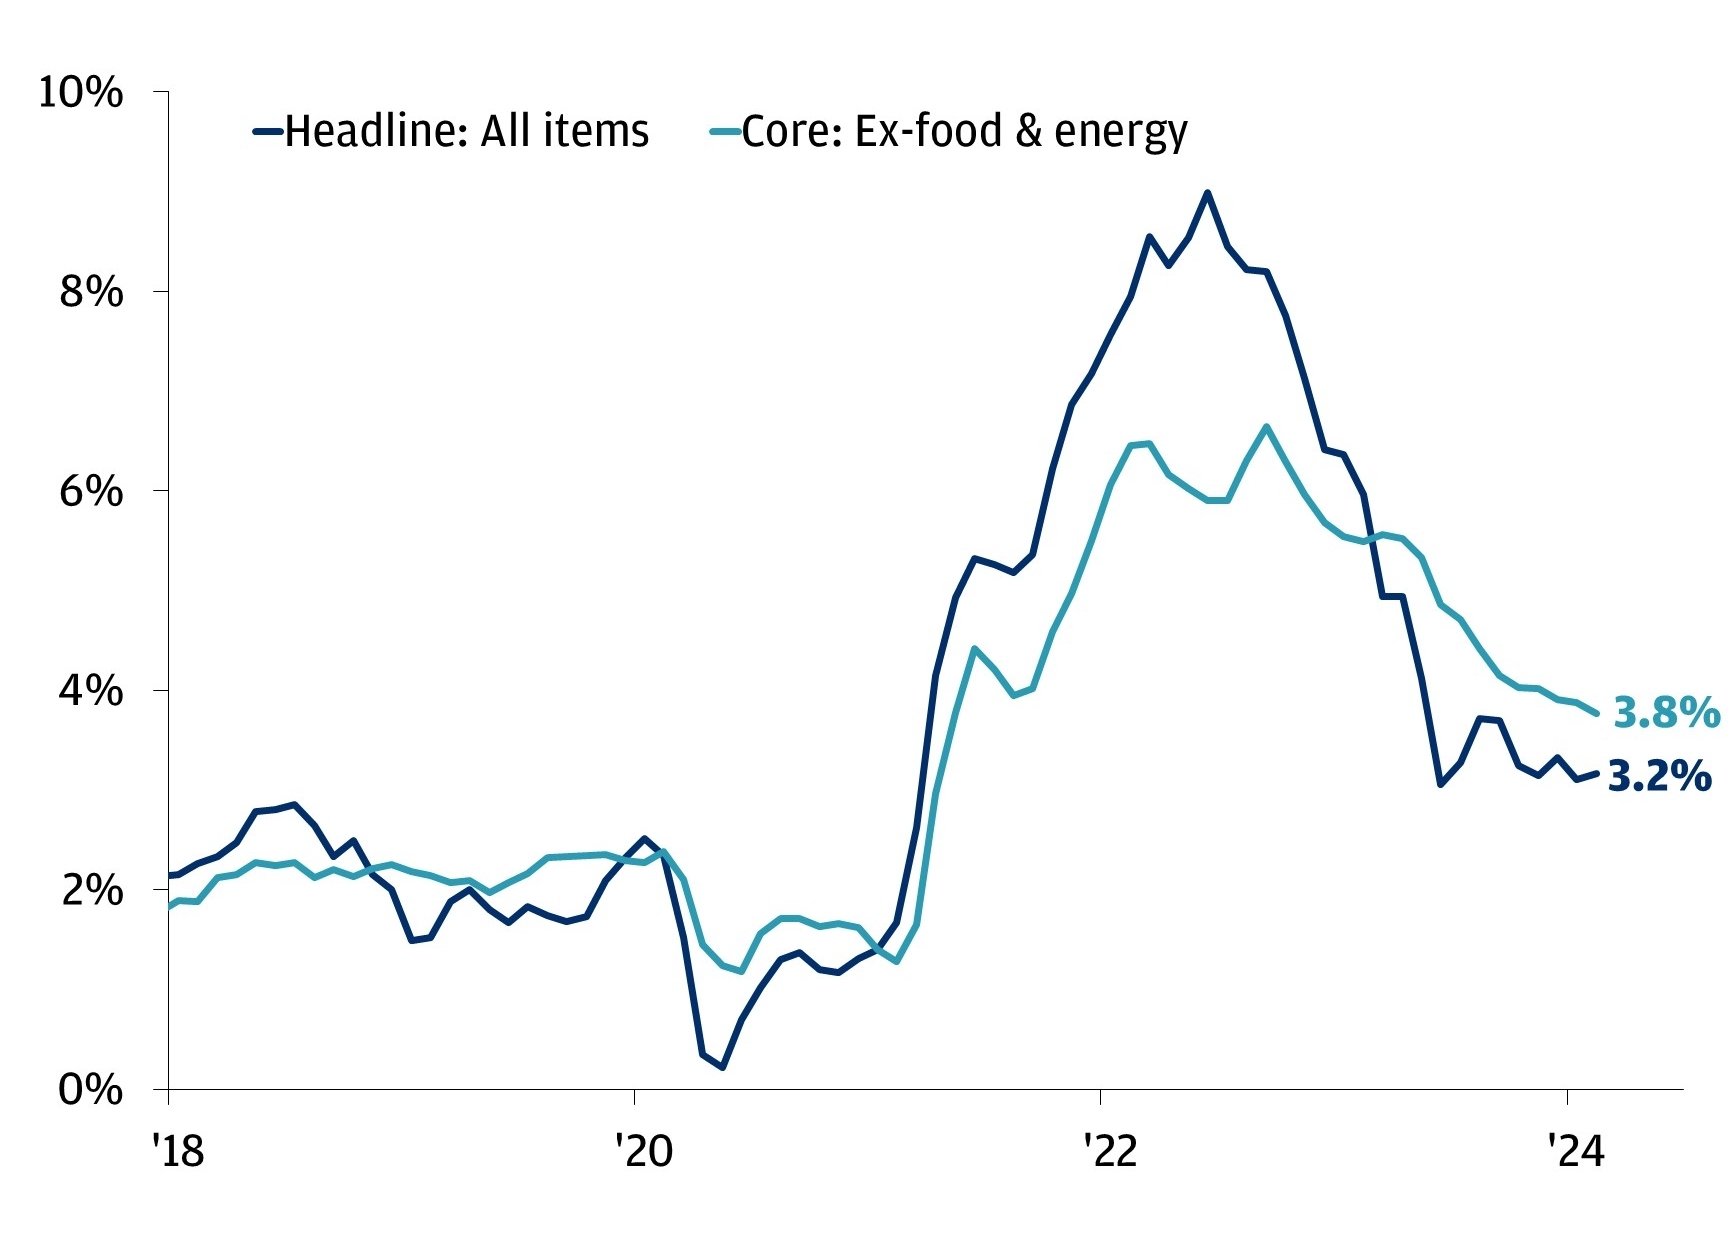 The chart shows U.S. CPI, year-over-year percentage change for headline and core.